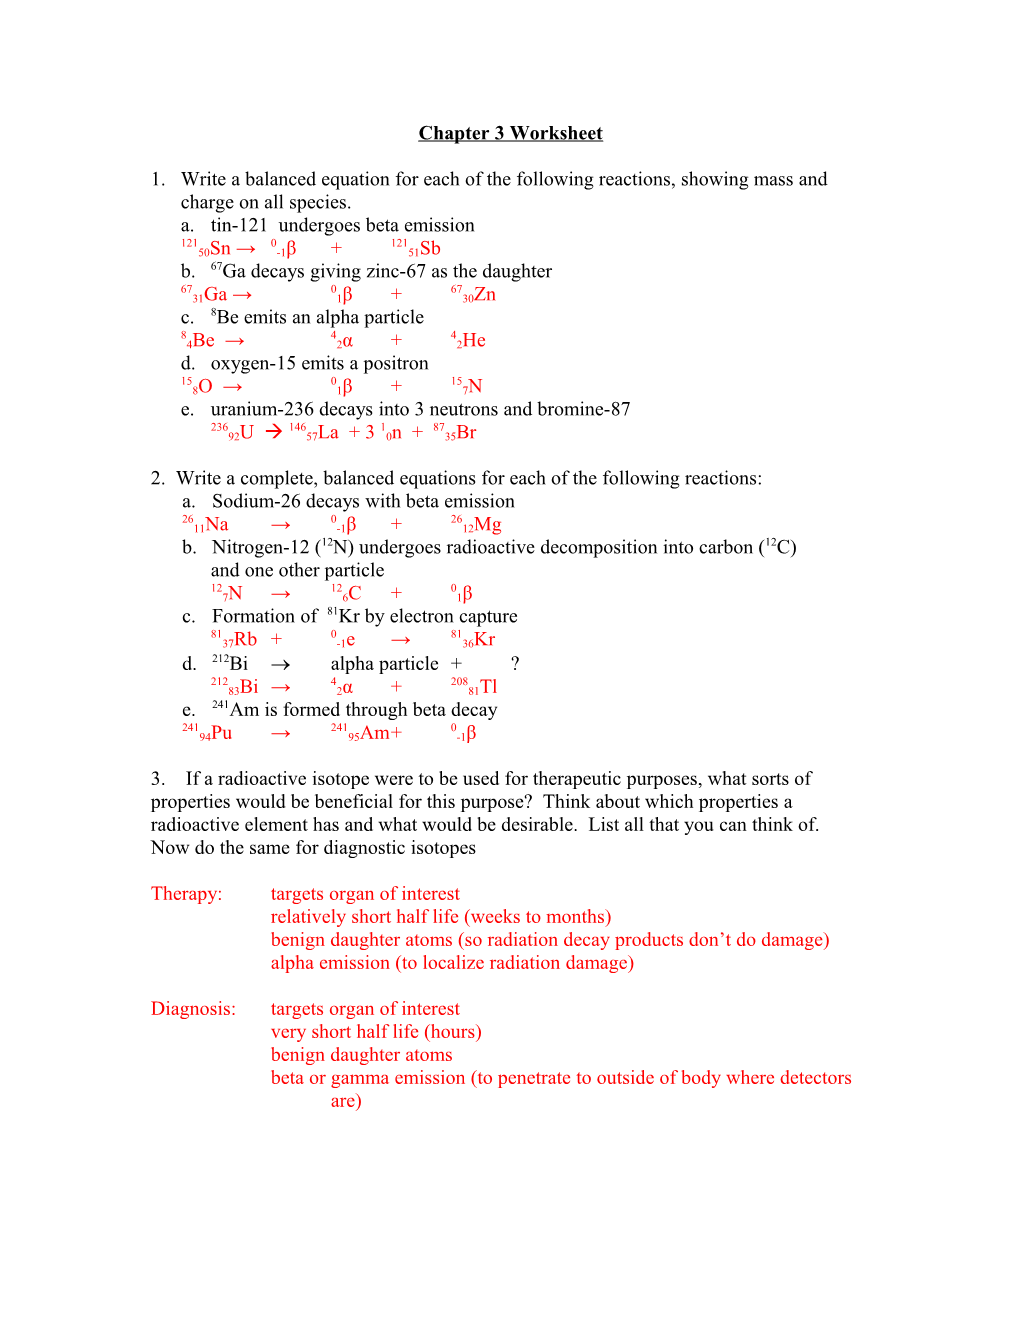 Chapter 3 Worksheet Answers